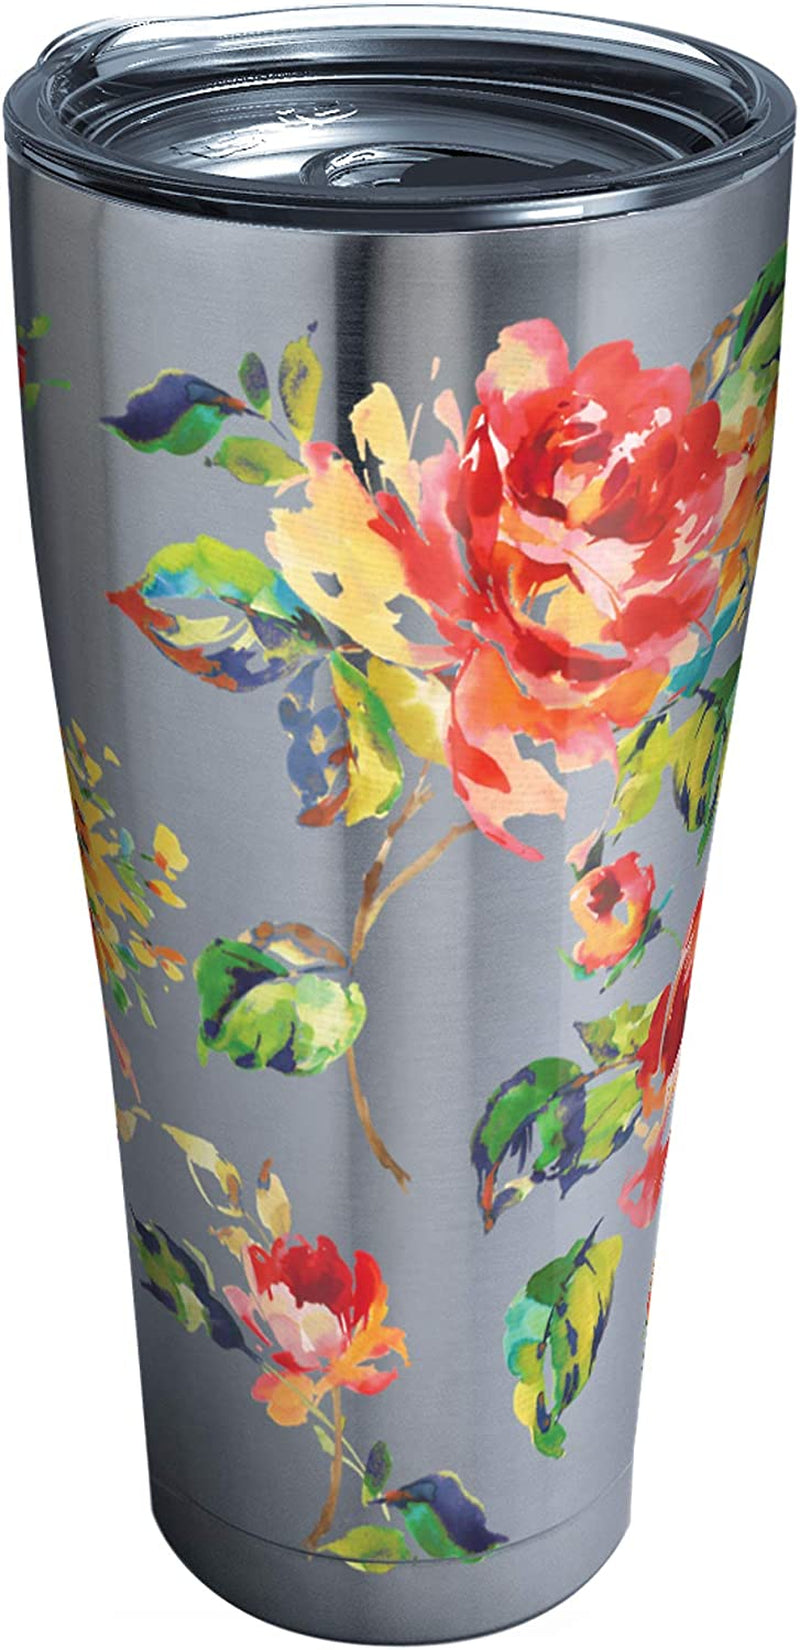 Tervis Triple Walled Fiesta Insulated Tumbler Cup Keeps Drinks Cold & Hot, 20Oz - Stainless Steel, Floral Bouquet Home & Garden > Kitchen & Dining > Tableware > Drinkware Tervis Stainless Steel 30oz 